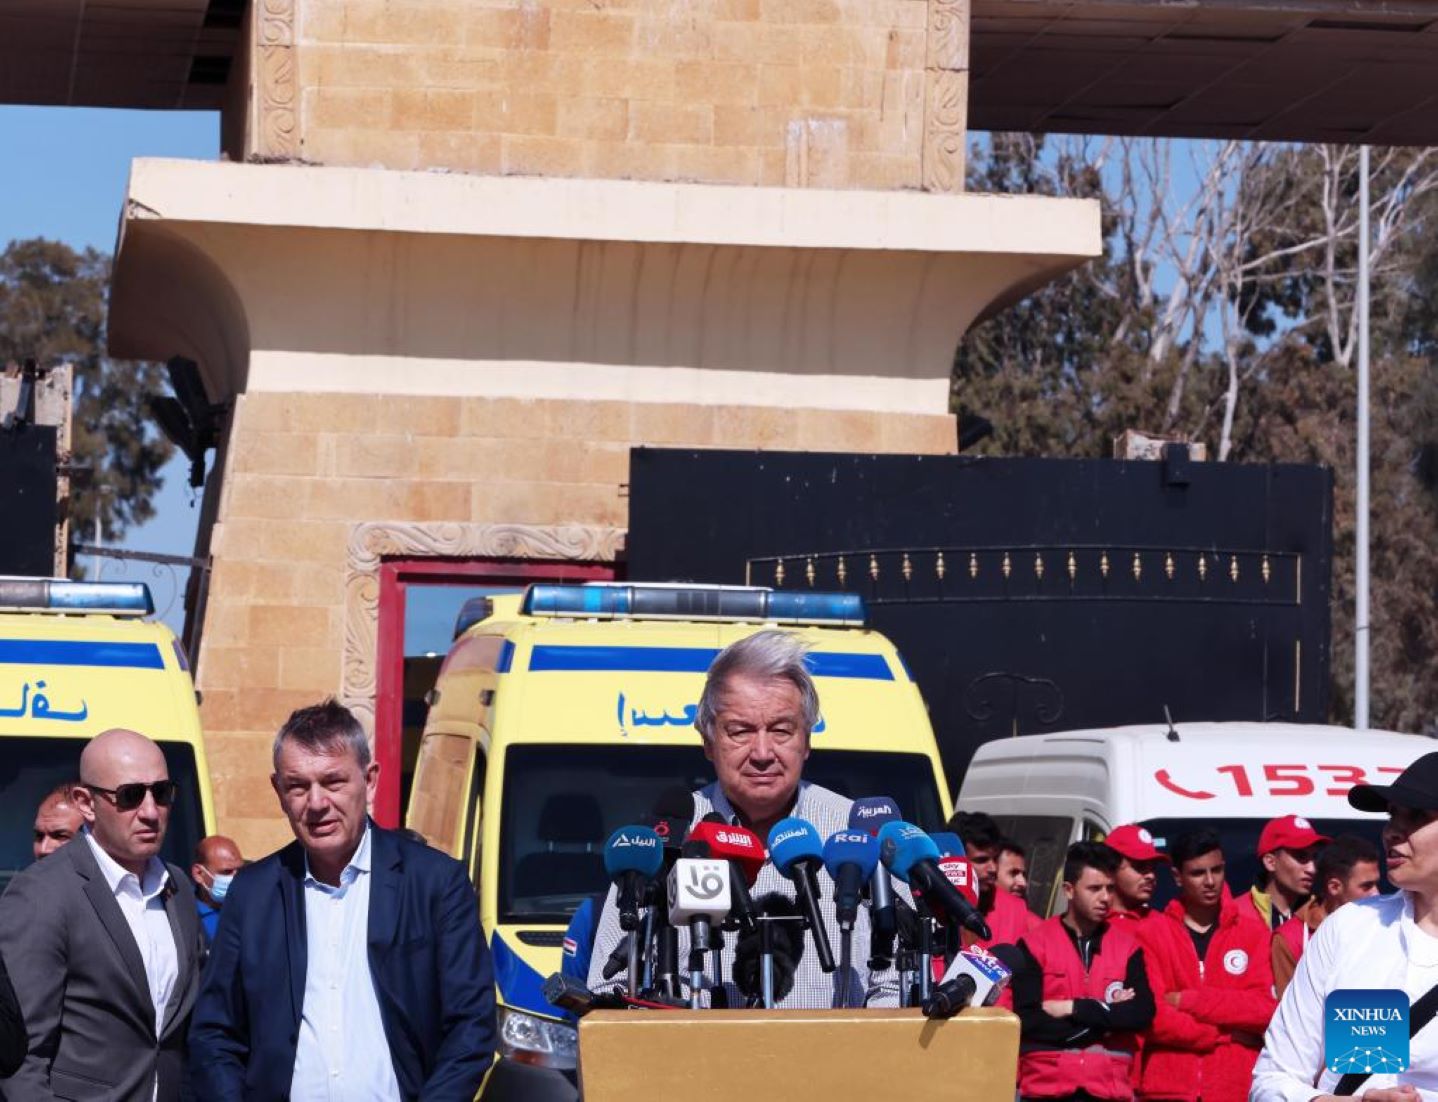 UN Chief Visits Rafah Crossing, Renews Call For Ceasefire In Gaza